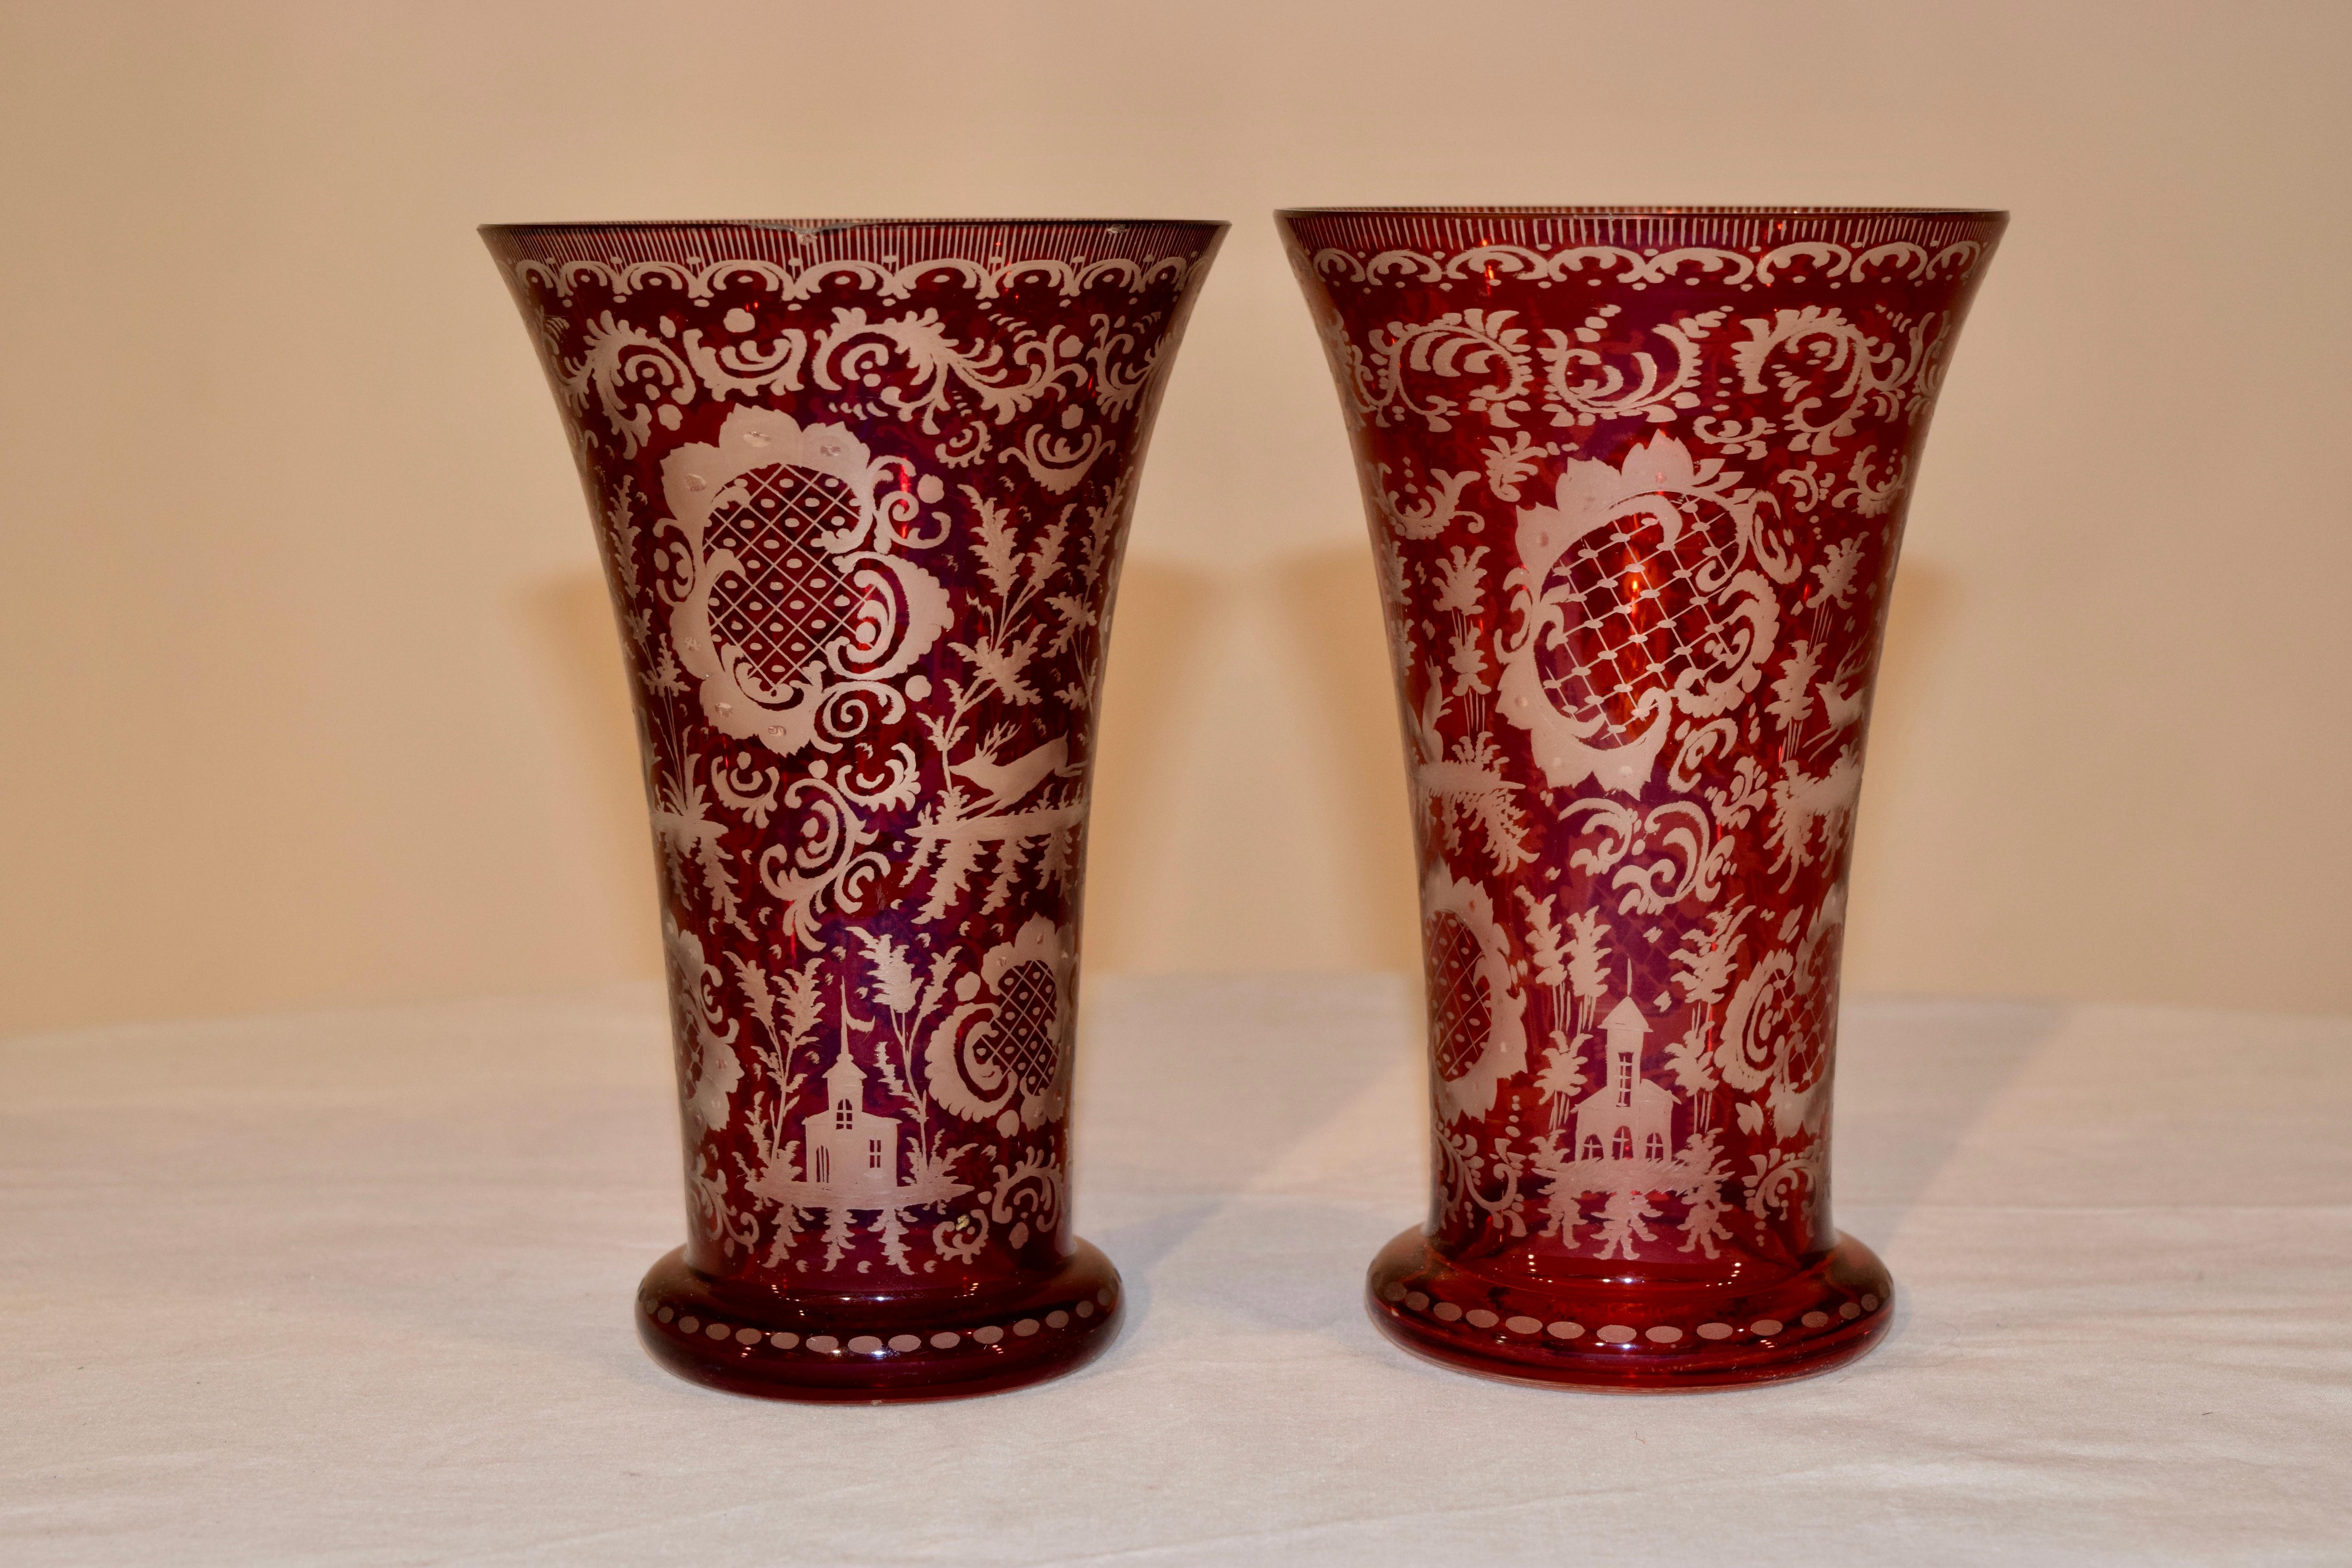 Antique BOHEMIAN CZECH VASE Cased cut to cranberry glass.White overlay.Hand Painted Roses with Gold trim Floral design.Cut top edges.